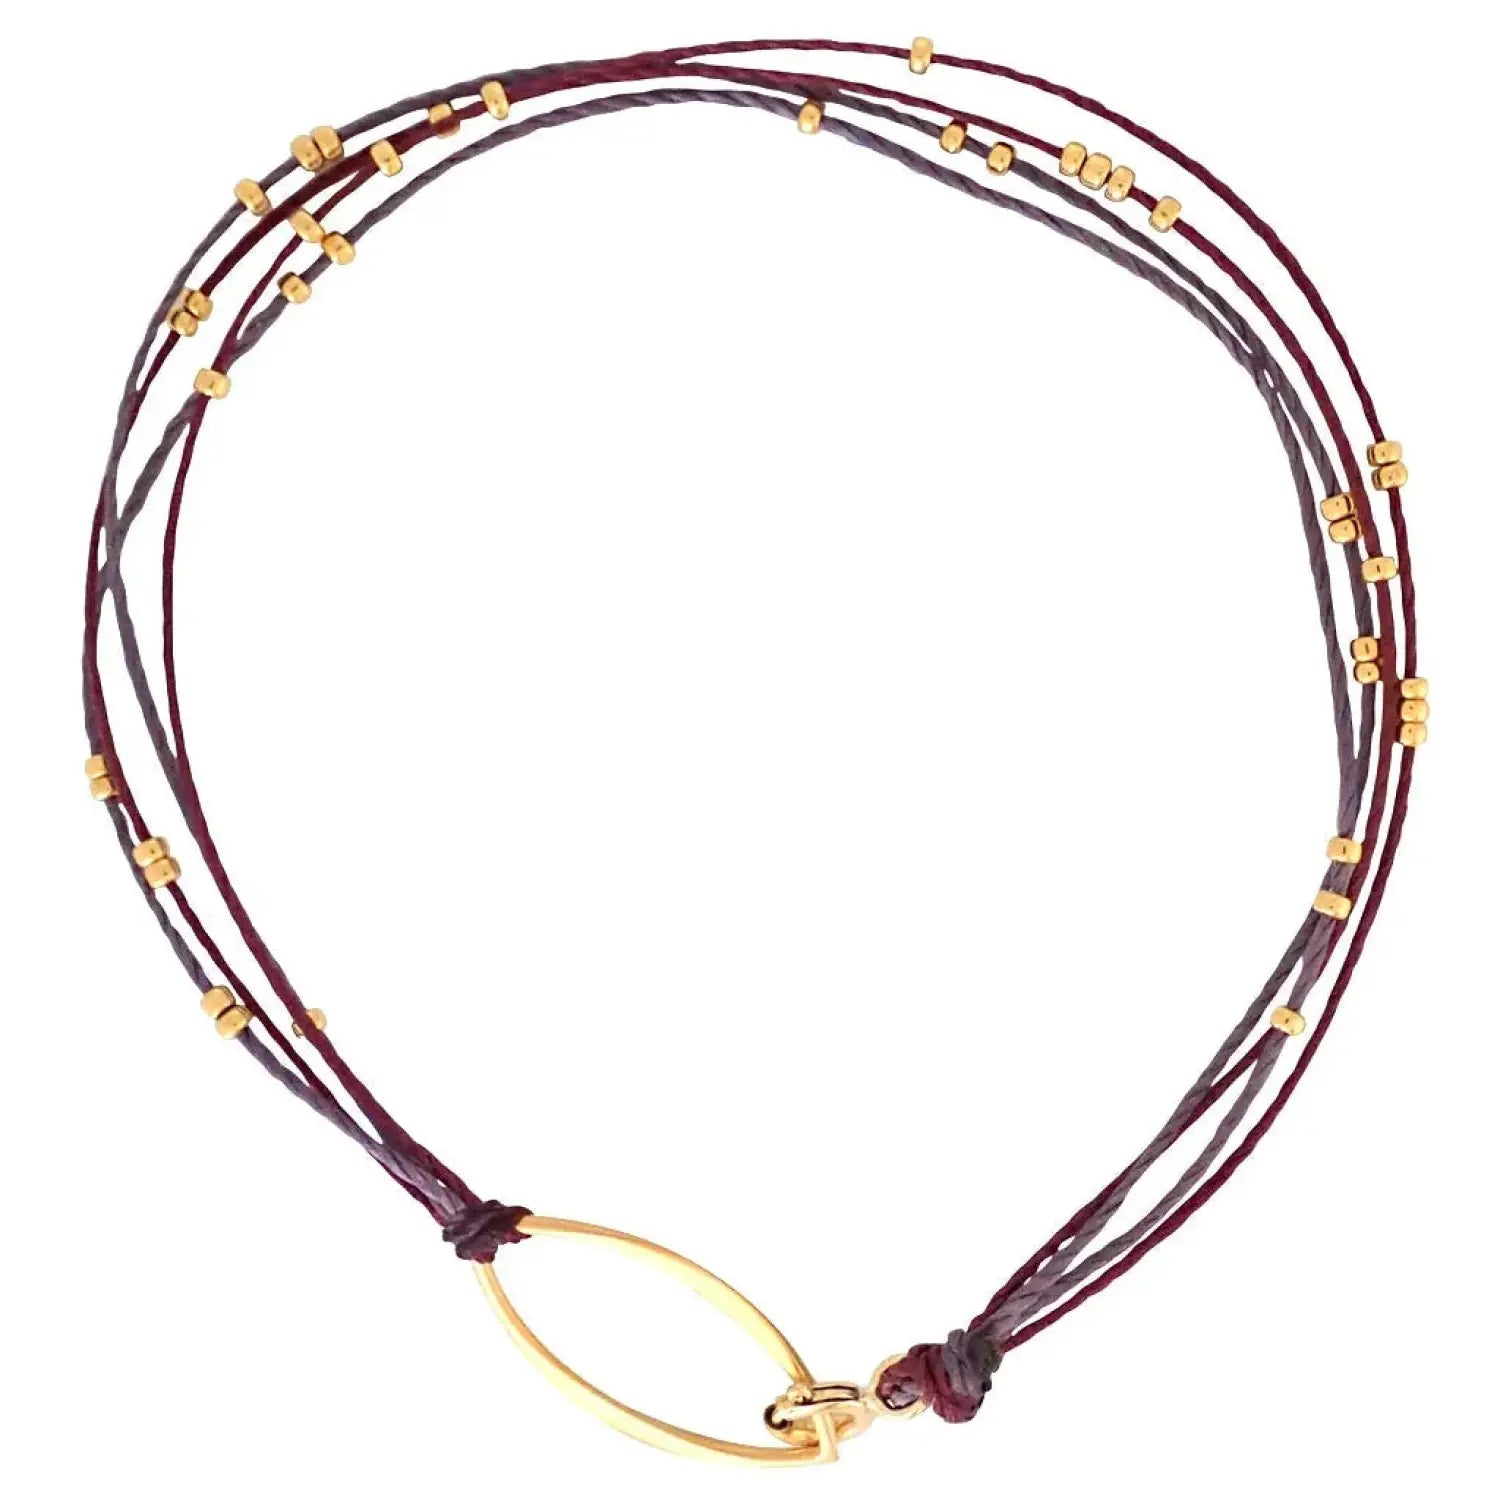 Bronwen Jewelry's Radiance Bracelet Mixed Purples Gold View